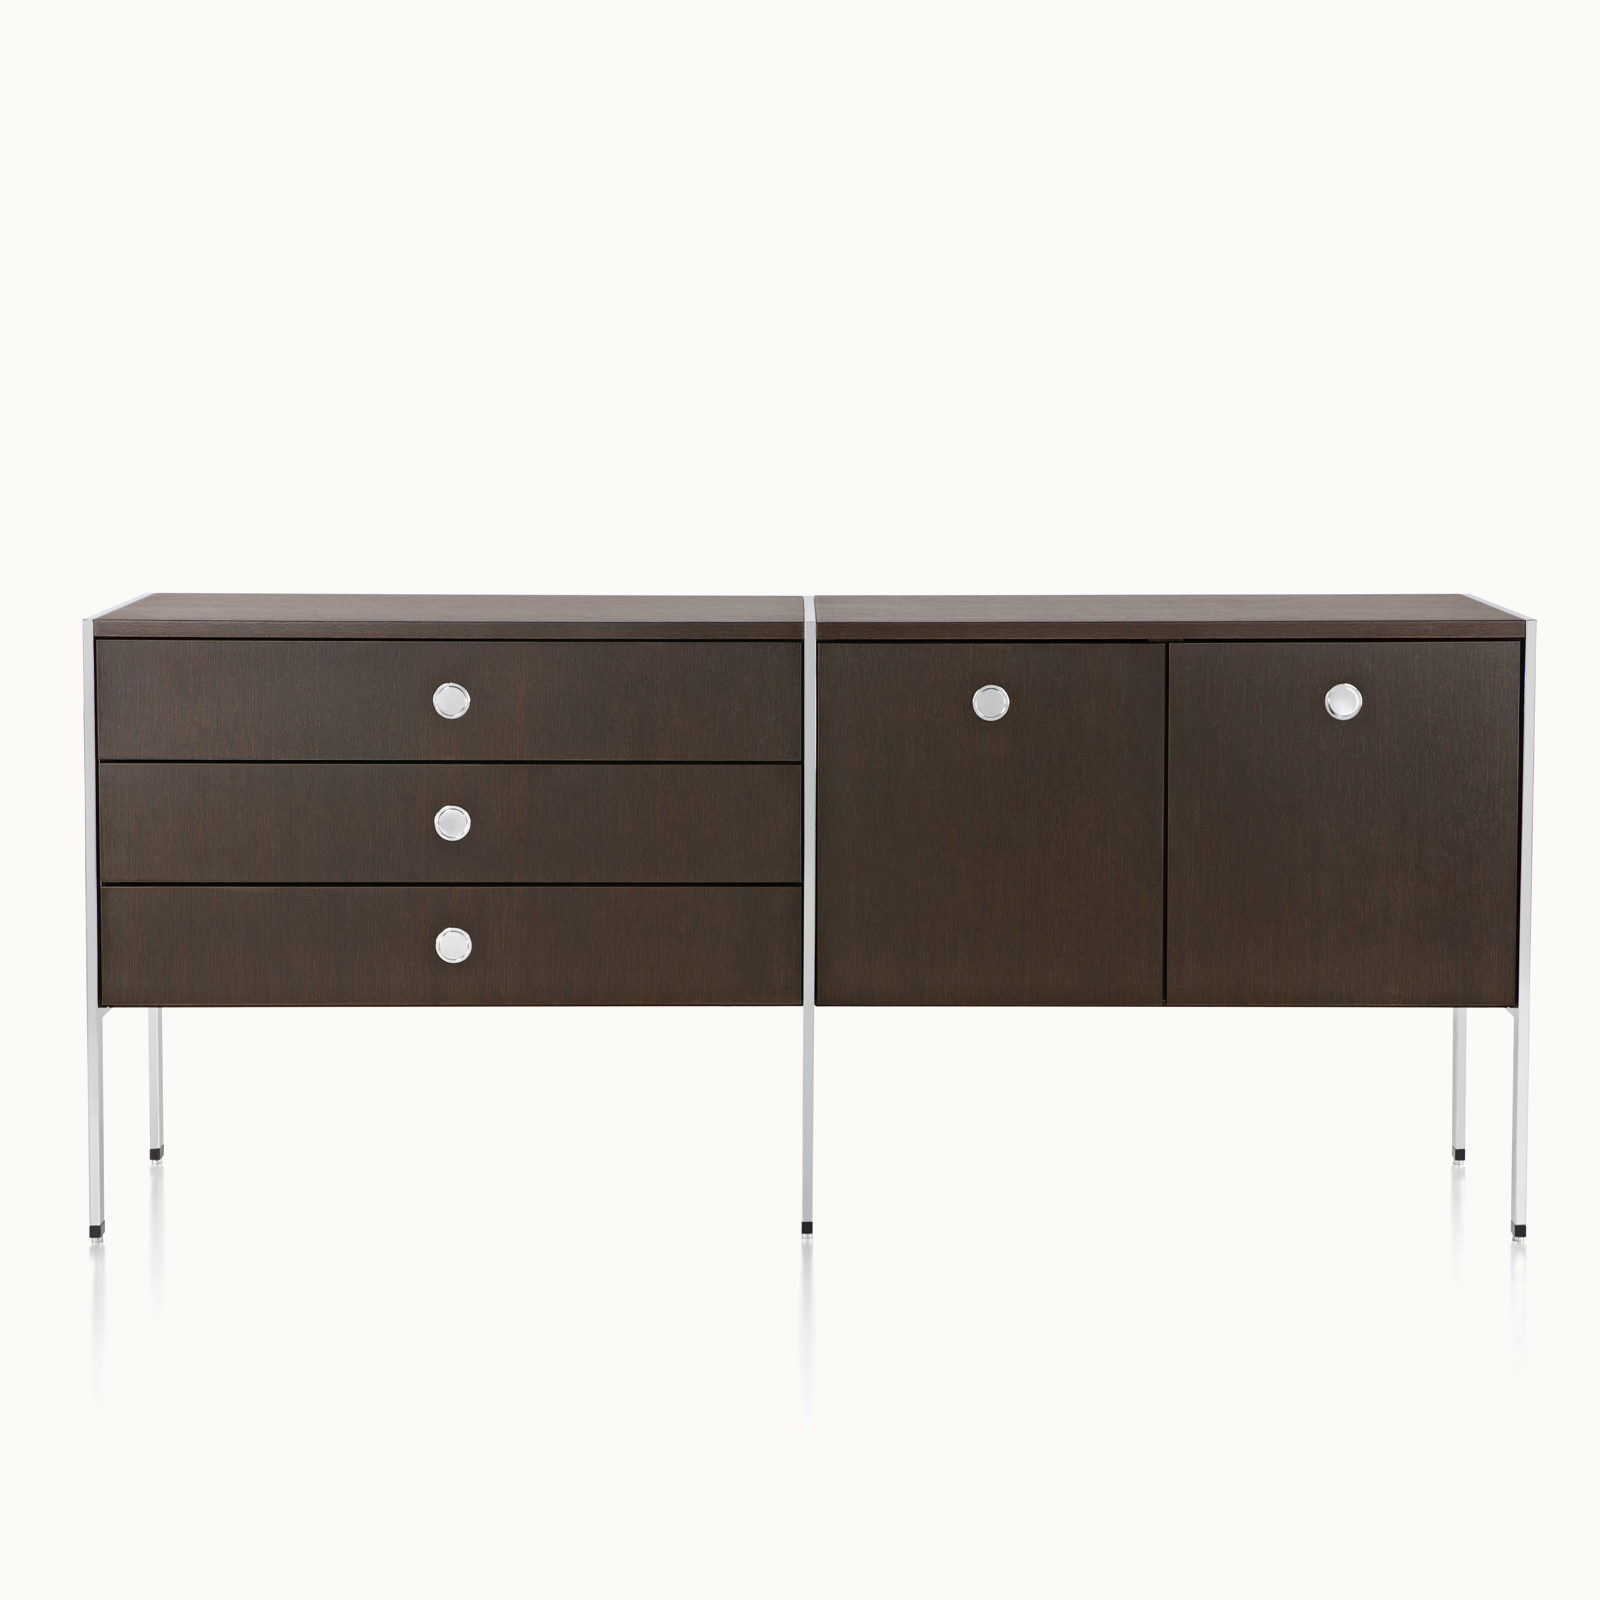 A two-unit H Frame Storage credenza with a dark wood finish and modules for box drawers and enclosed cabinets.